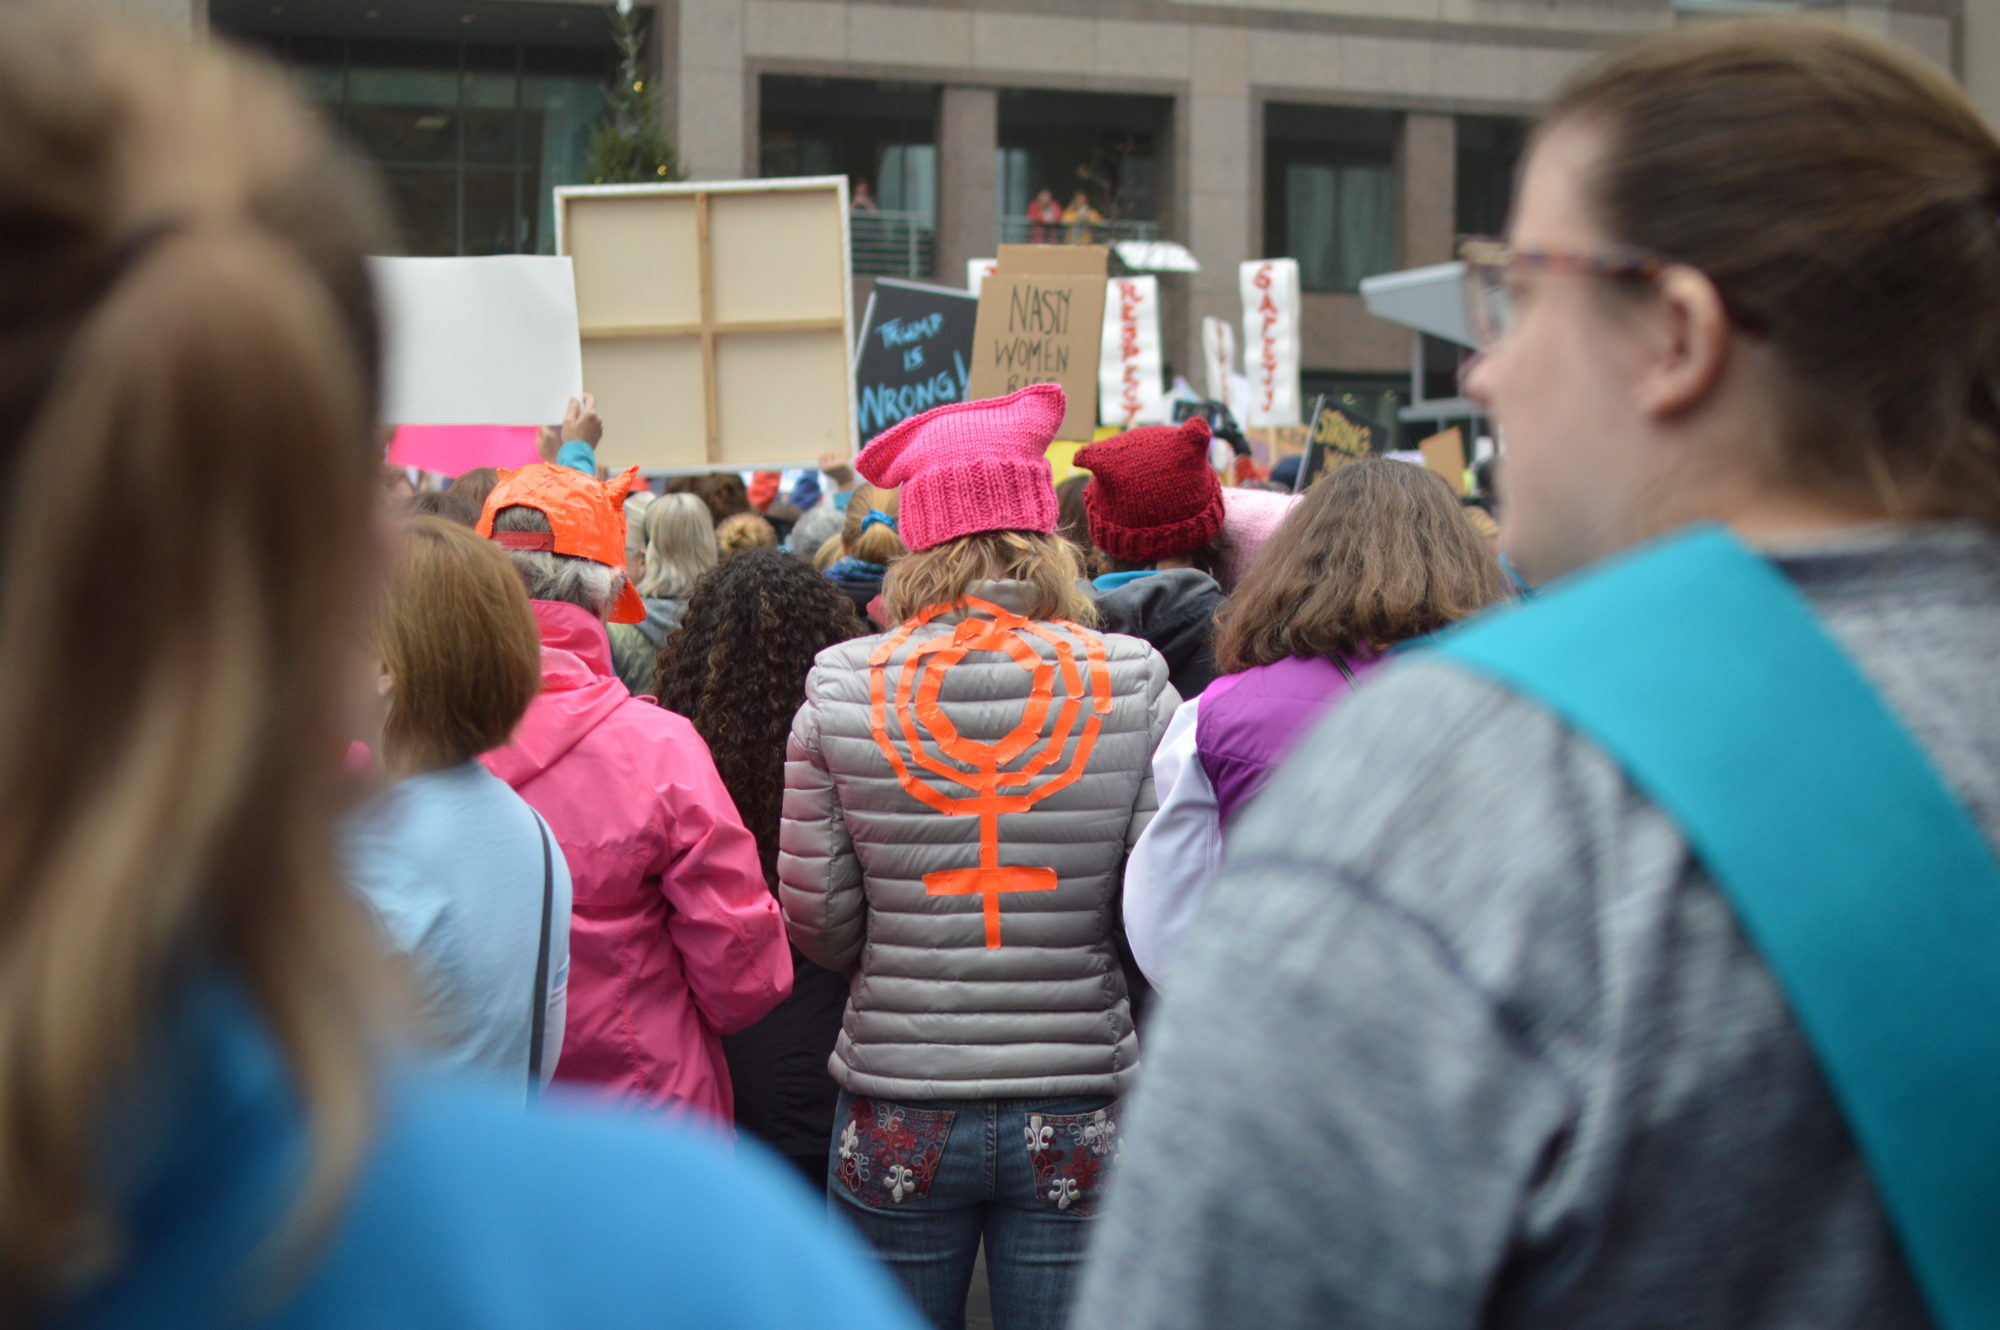 A protestor displays the female solidarity symbol in duct tape on the back of her jacket at the Women's March on Raleigh on Sat., Jan. 21, 2017. The Women's March on Raleigh was a Sister March to the Women's March on Washington. An estimated 17,000 people were in attendance at the march in Raleigh, coinciding with 673 Women's Marches in solidarity with the march on Washington and an estimated 2,587,190 marchers worldwide (Source: The Action Network).